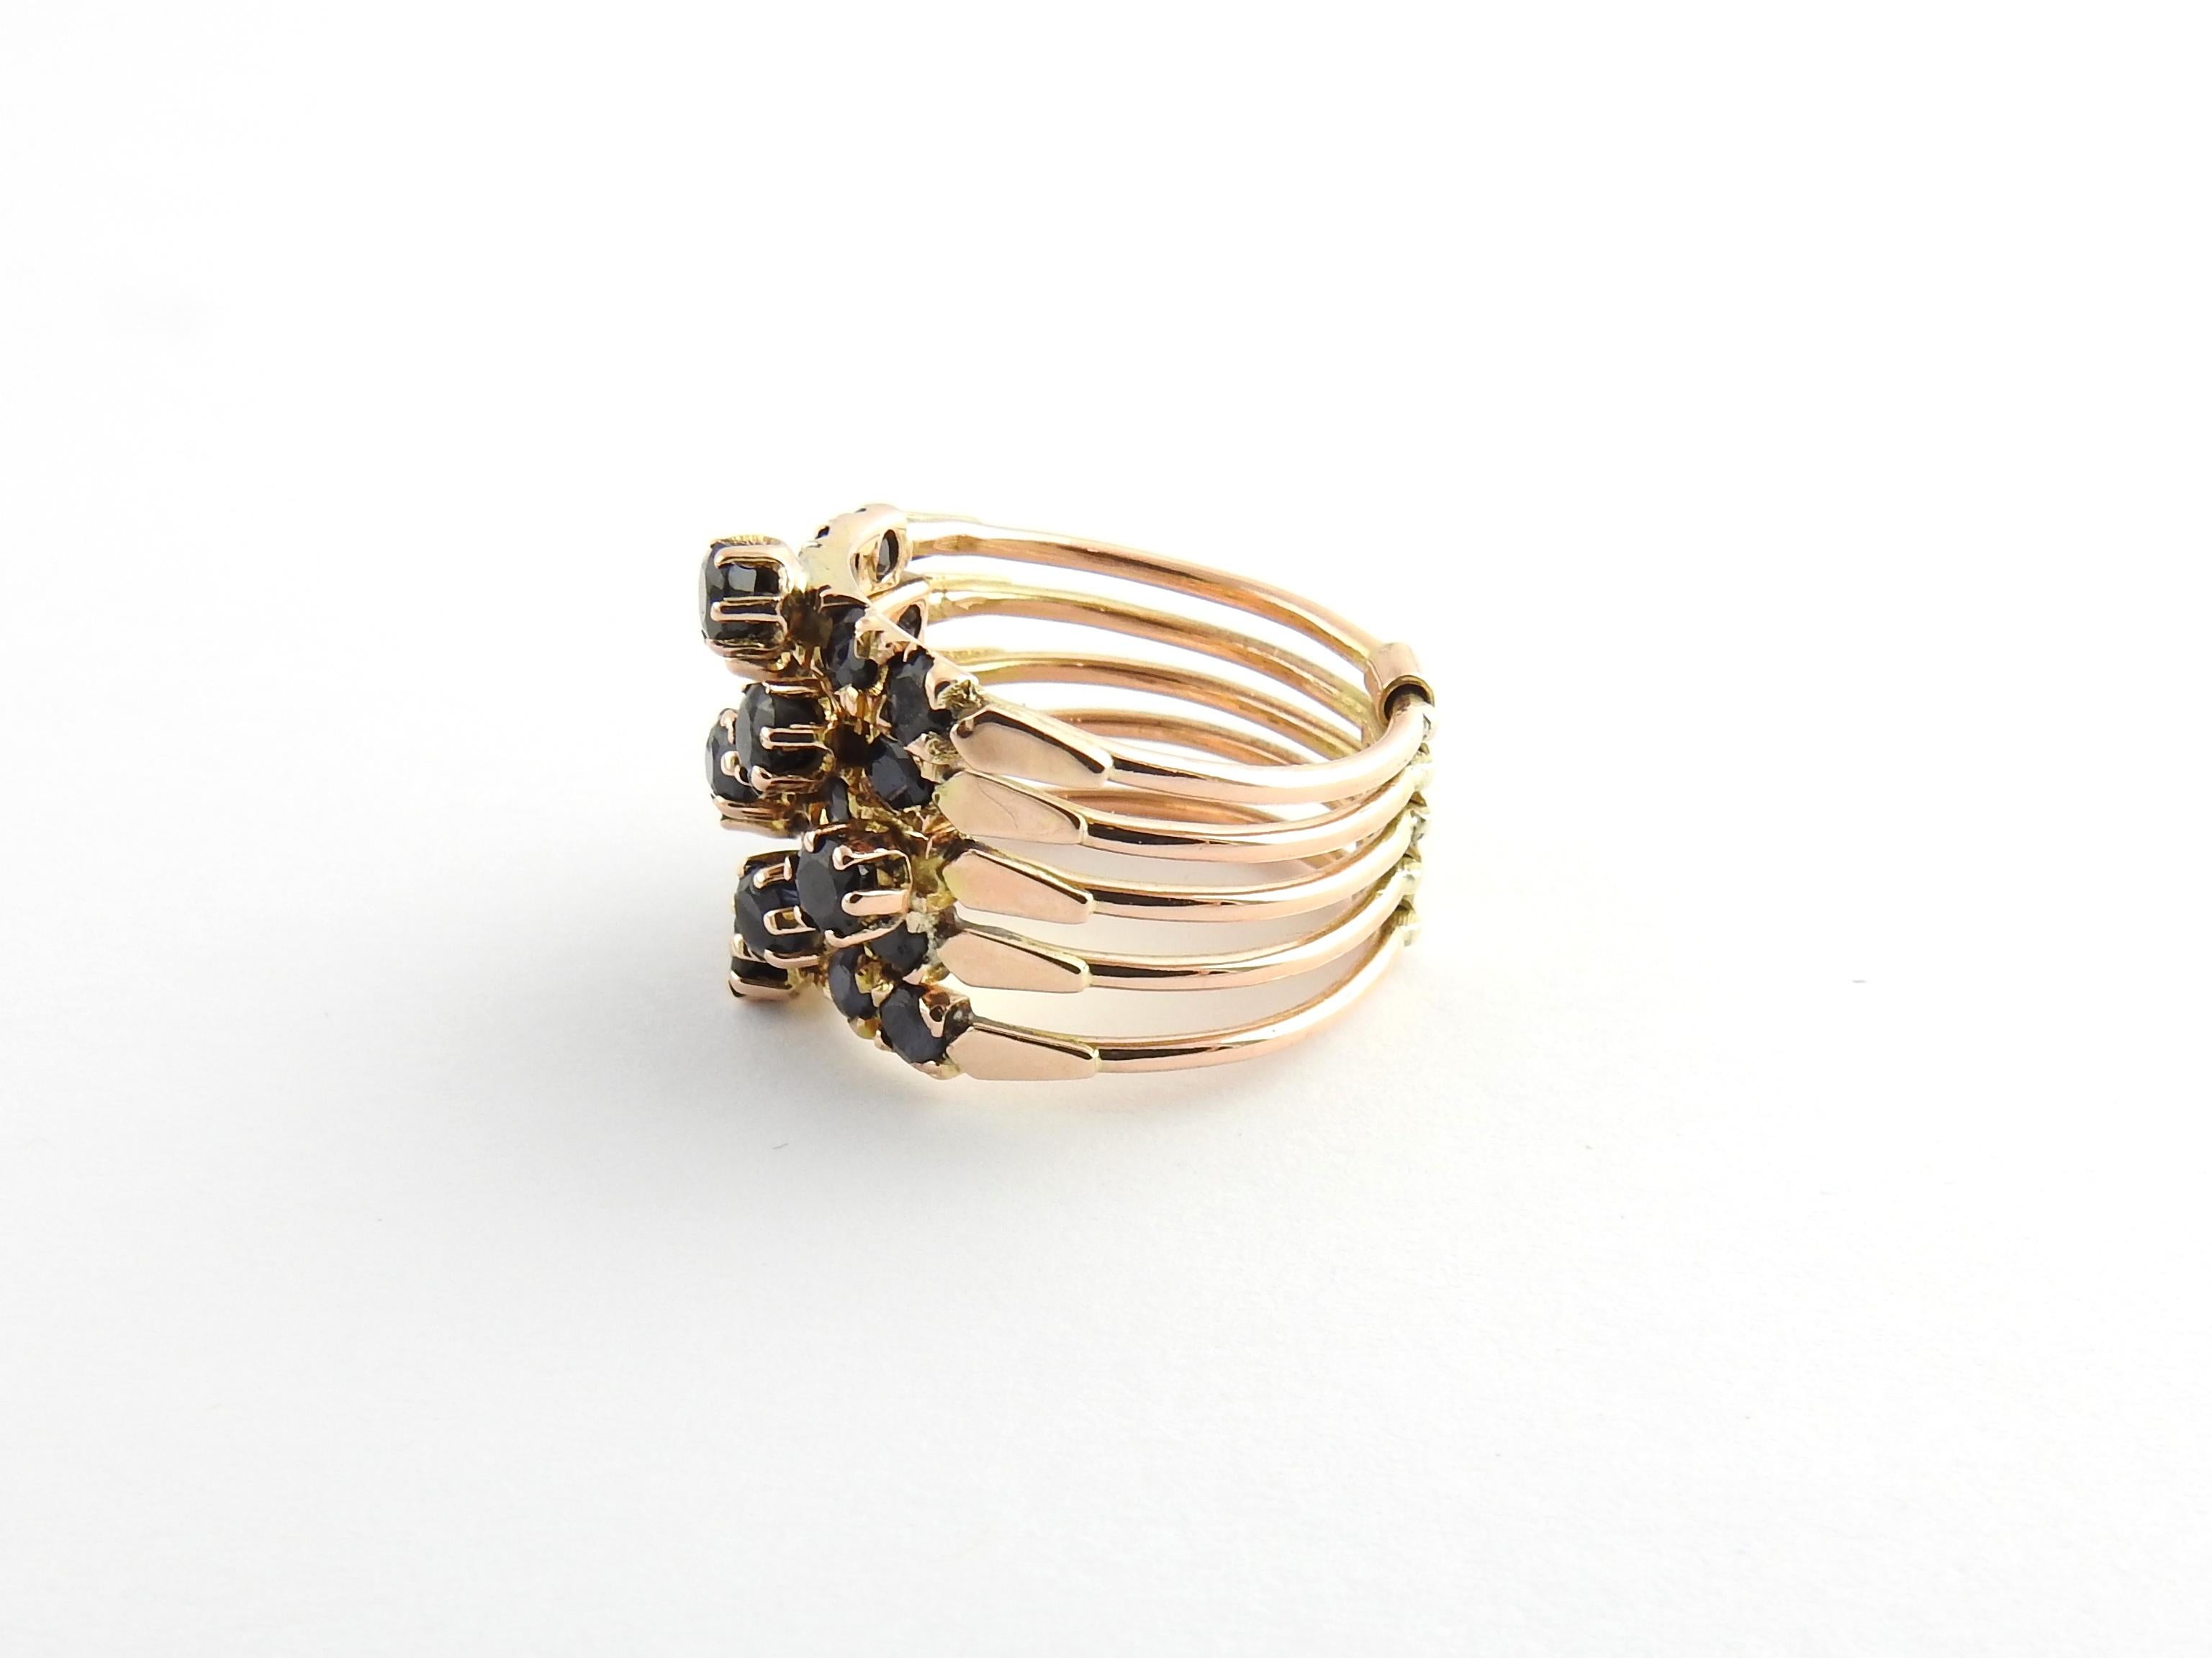 Vintage 14 Karat Rose Gold and Sapphire Multi Band Ring Size 4.75

This stunning five band ring features 25 blue sapphires set in beautifully detailed 14K rose gold. Bands are connected with a yellow gold bar.

Width: 15 mm. Shank: 9 mm.

Ring Size: